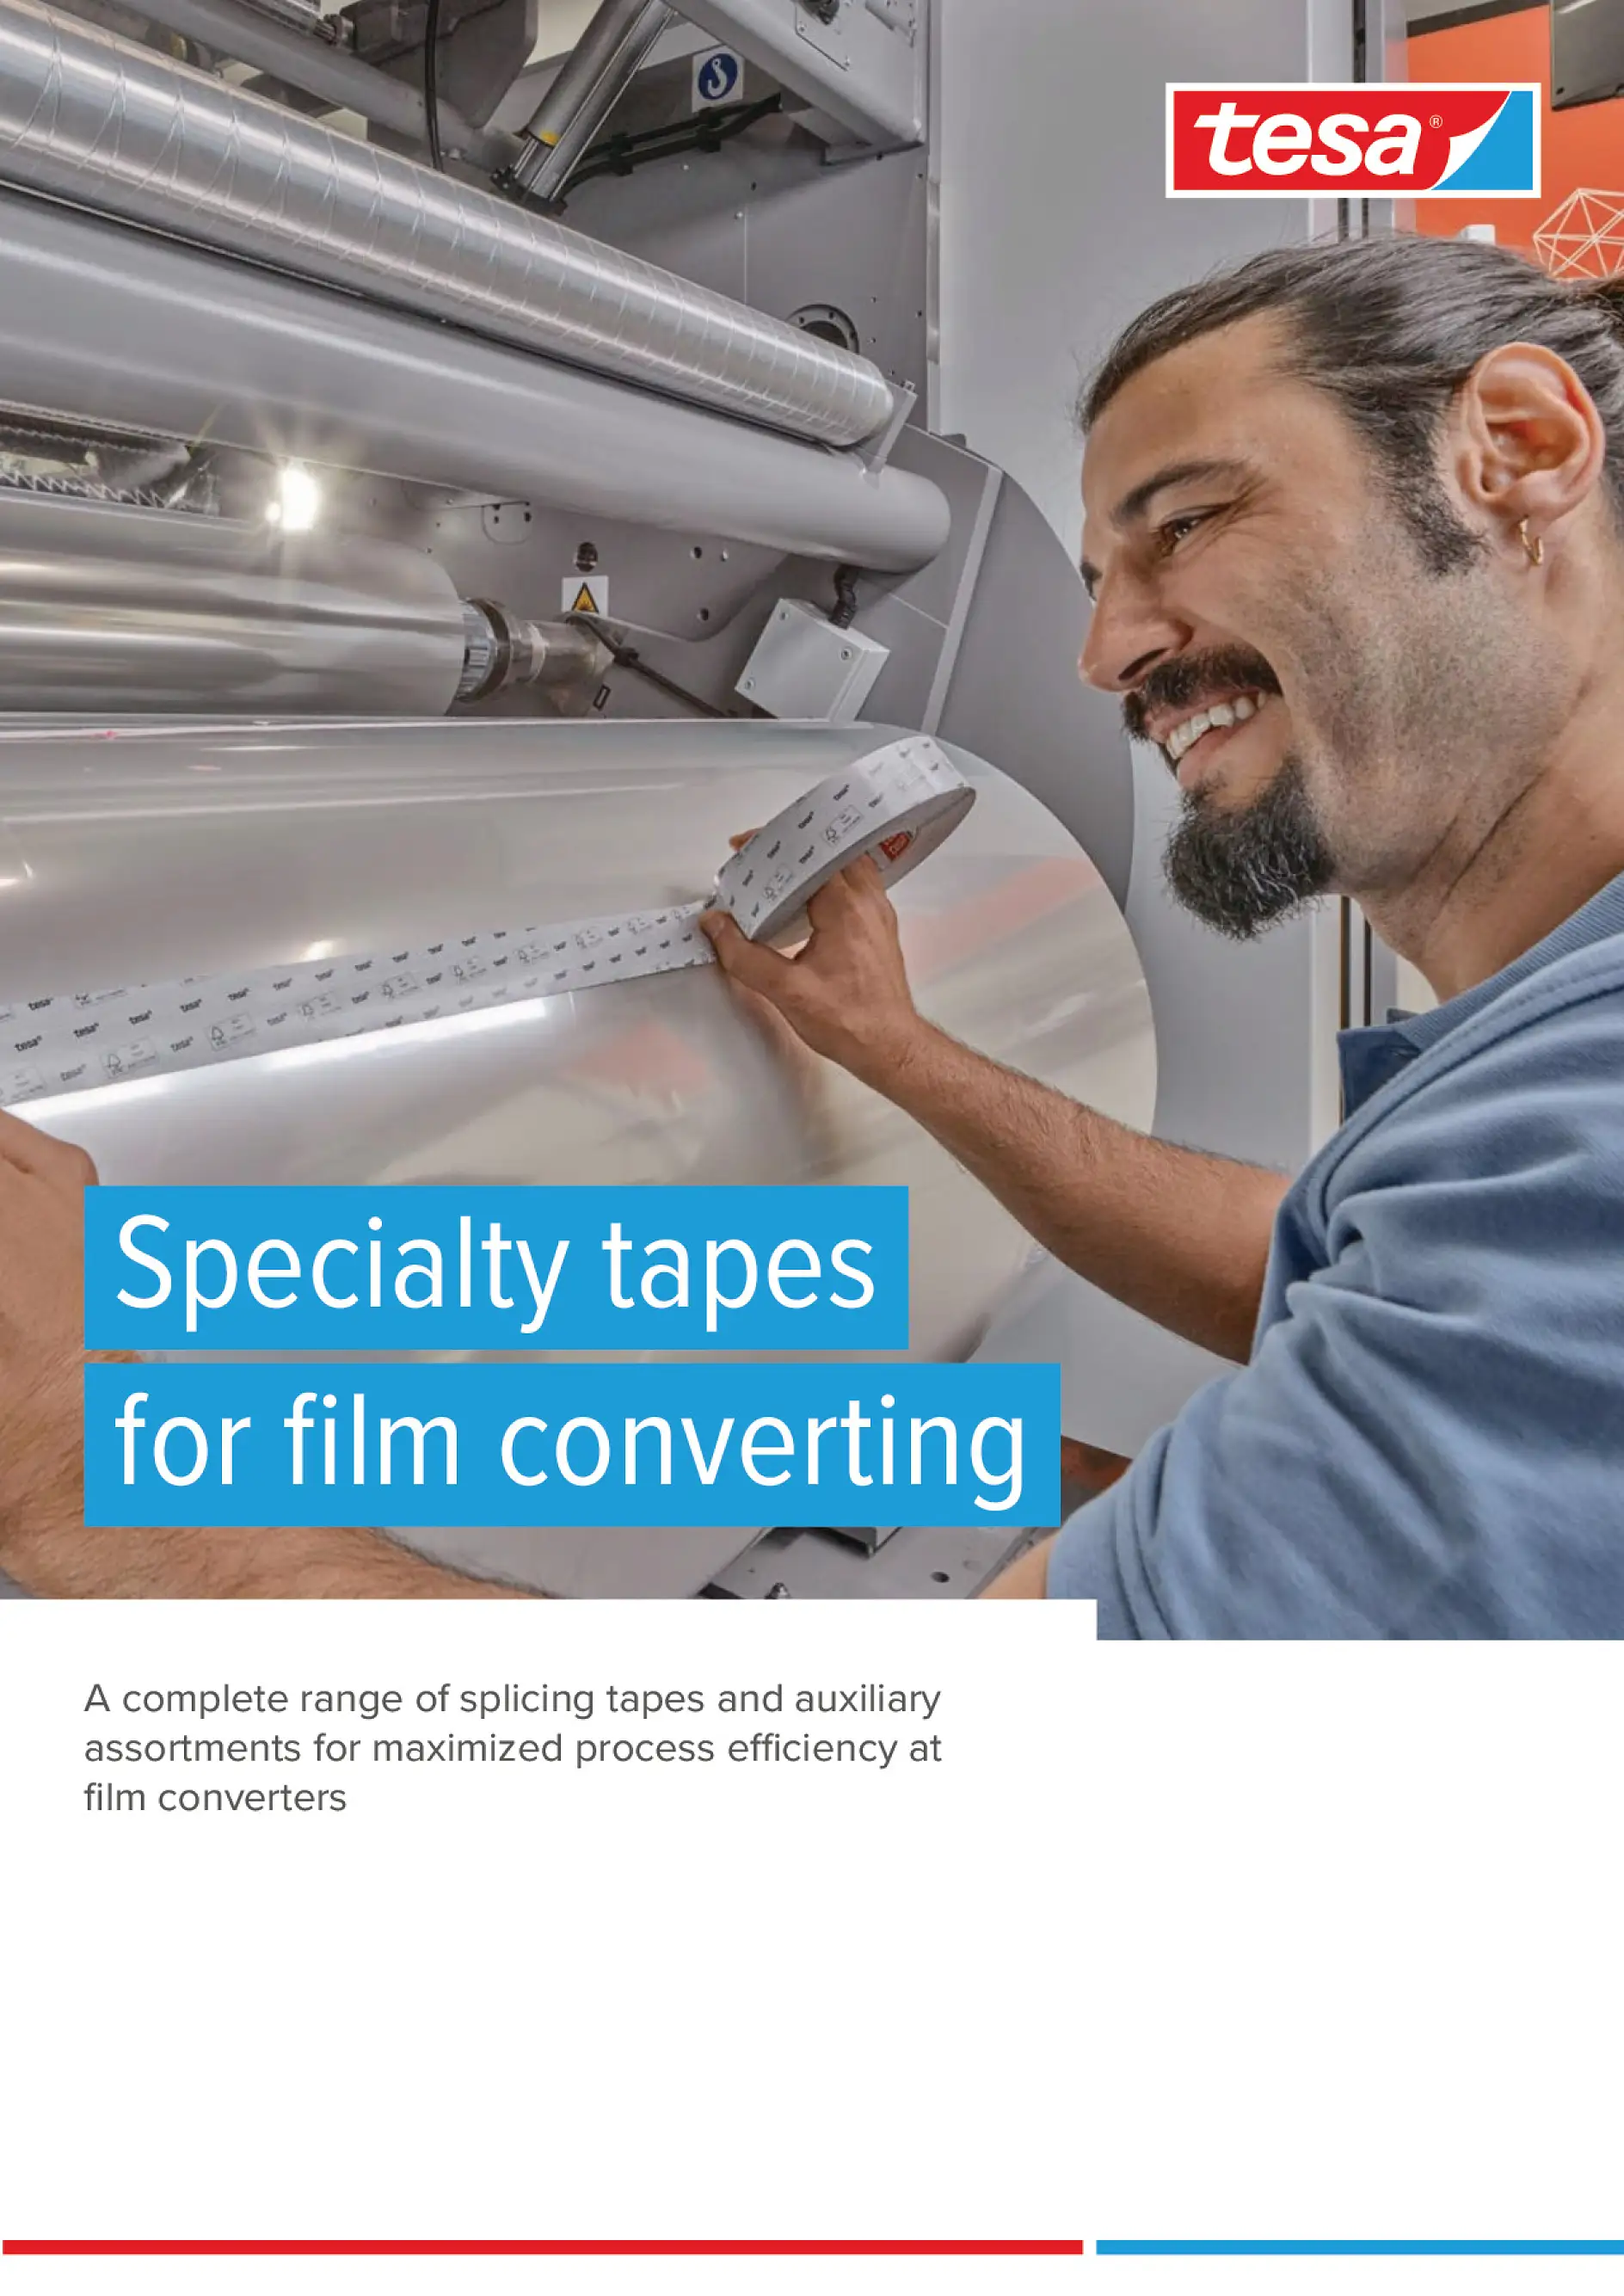 Film converting specialty tapes